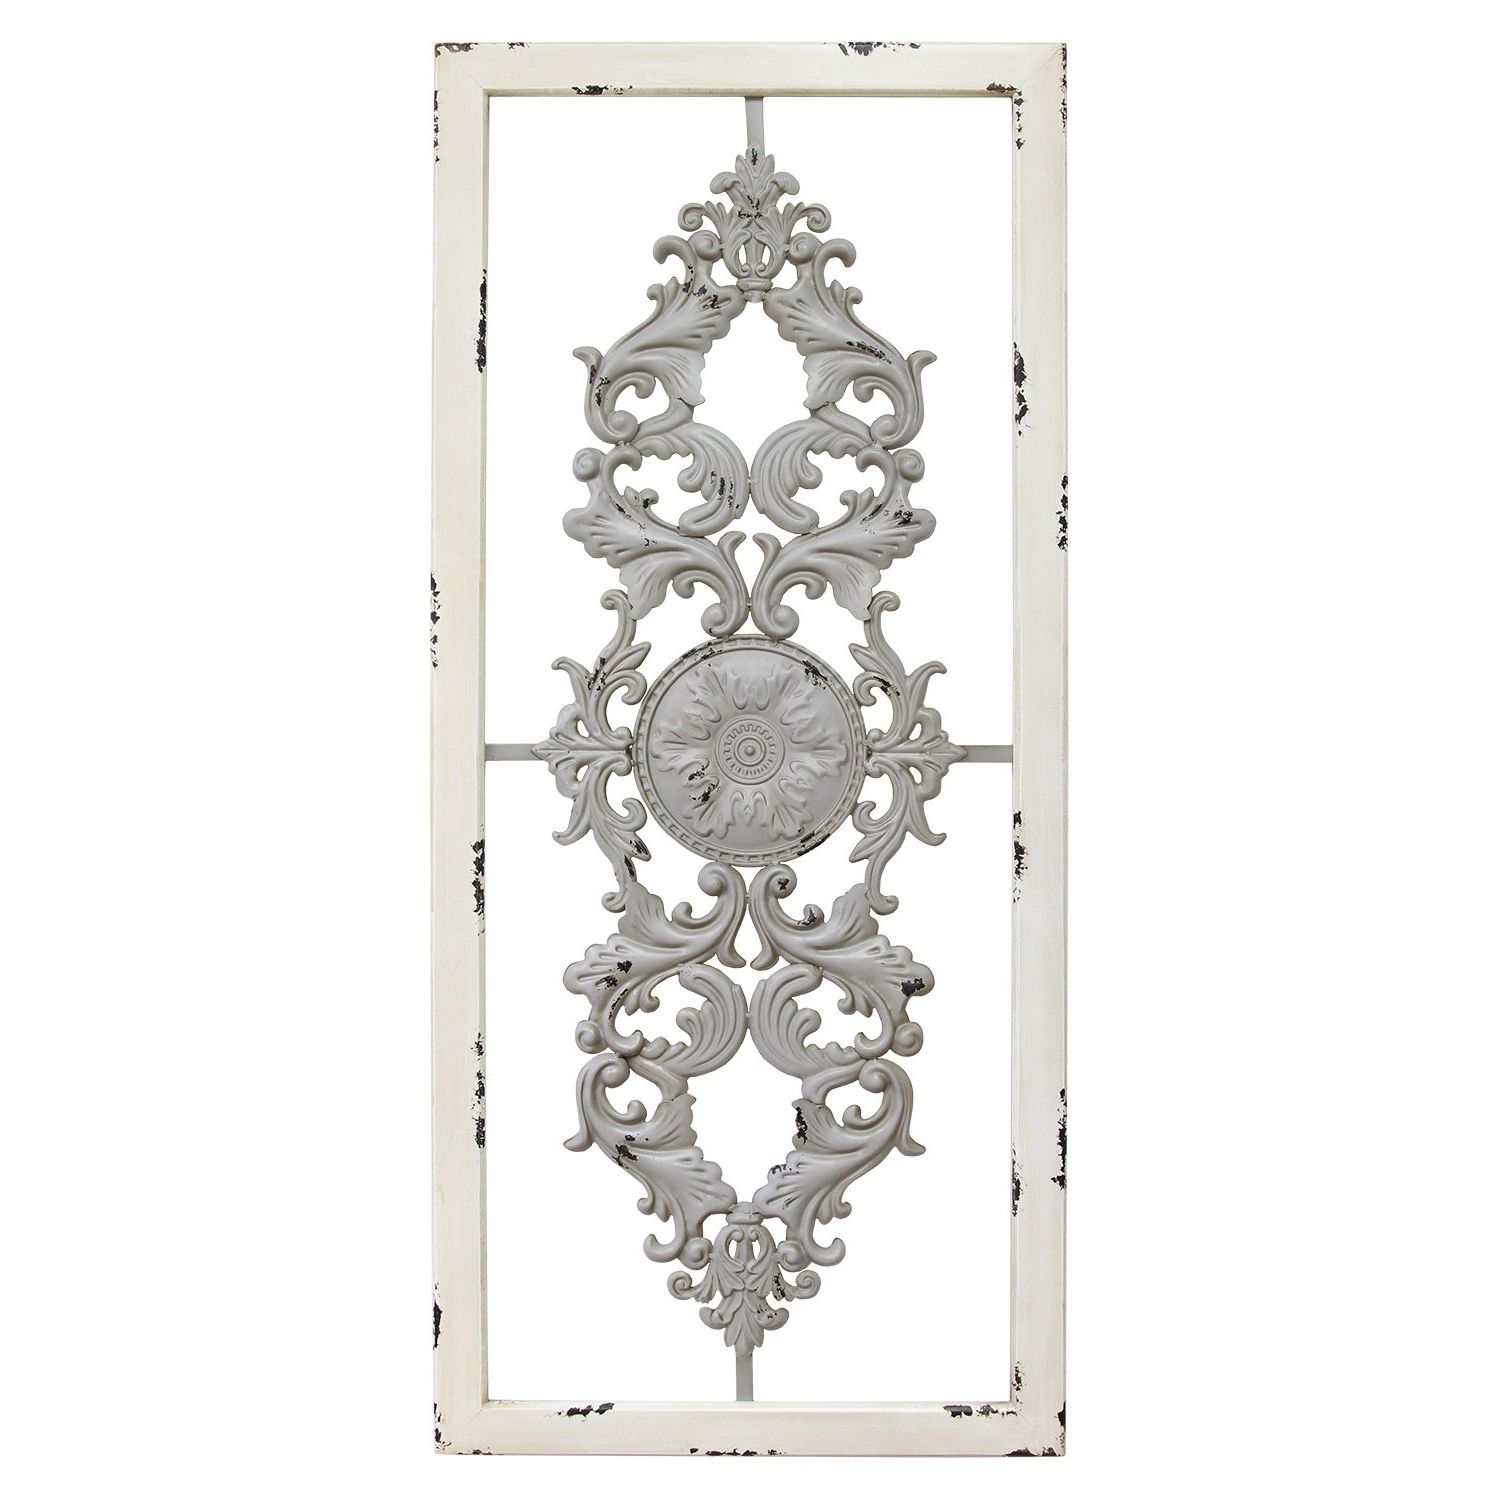 Scroll Panel Wall Decor With Regard To Well Known Amazon: Stratton Home Decor Scroll Panel Wall Decor, Grey: Home (View 2 of 20)